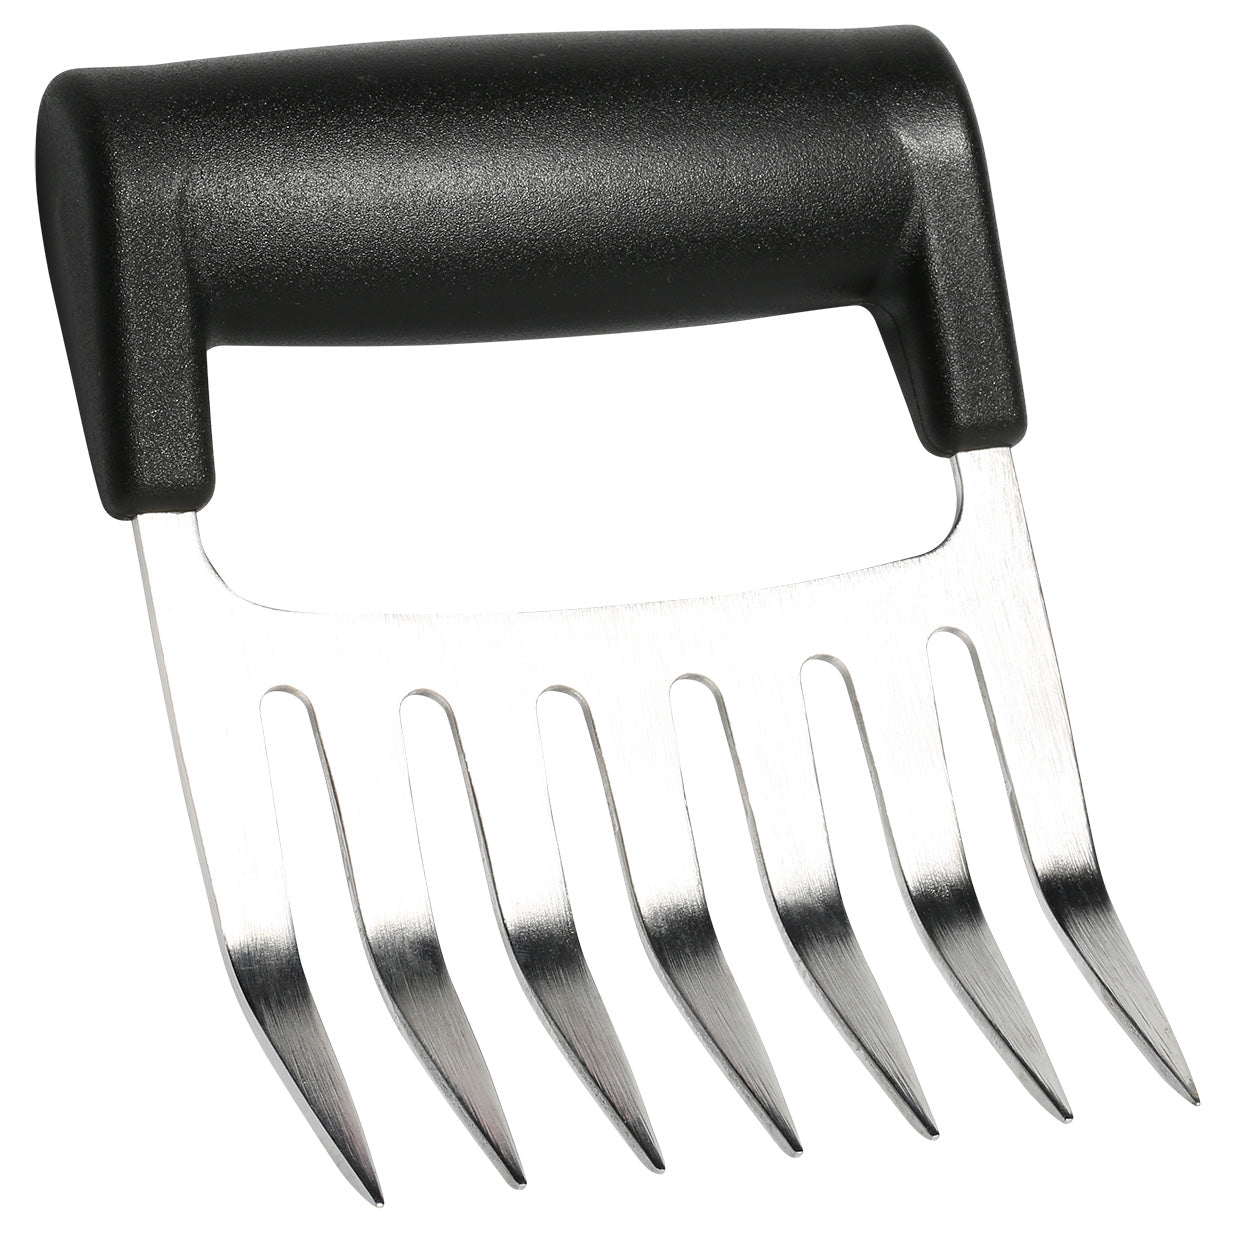 Bear Meat Claws For Shredding - BBQ Grill Claws Stainless Steel Pulled Pork  Chicken Shredder Claws Tool